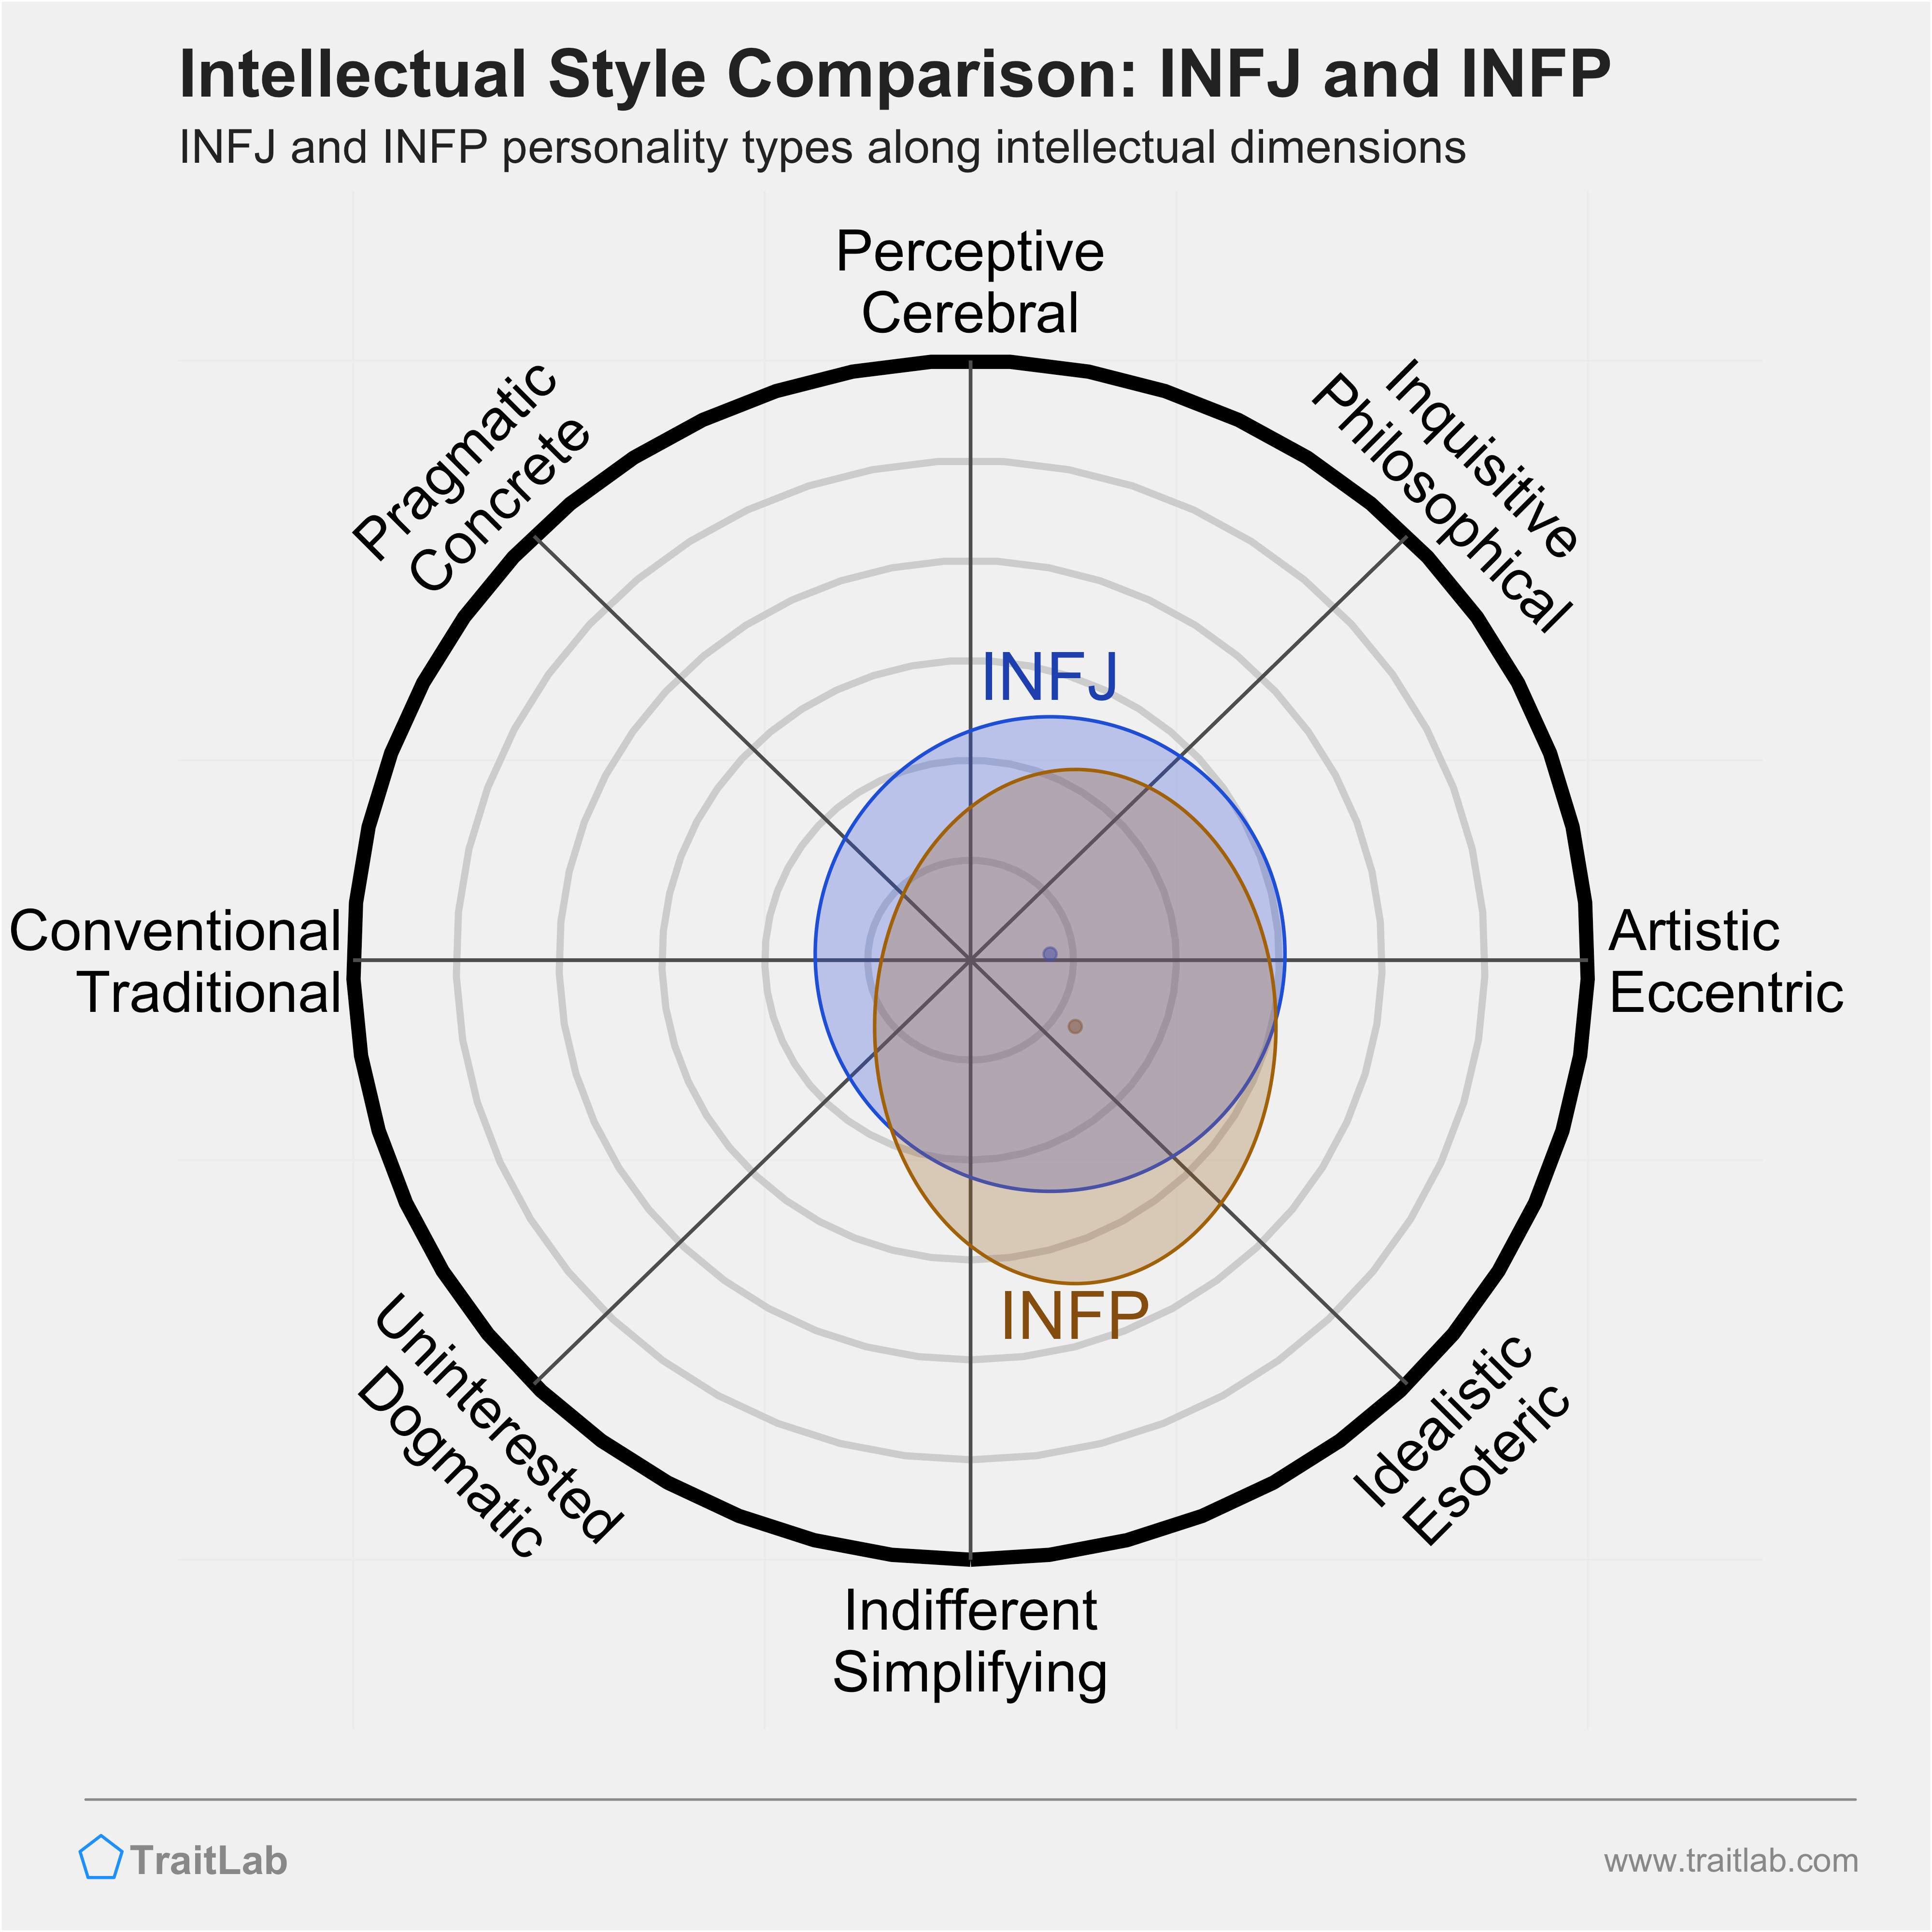 INFJ and INFP comparison across intellectual dimensions